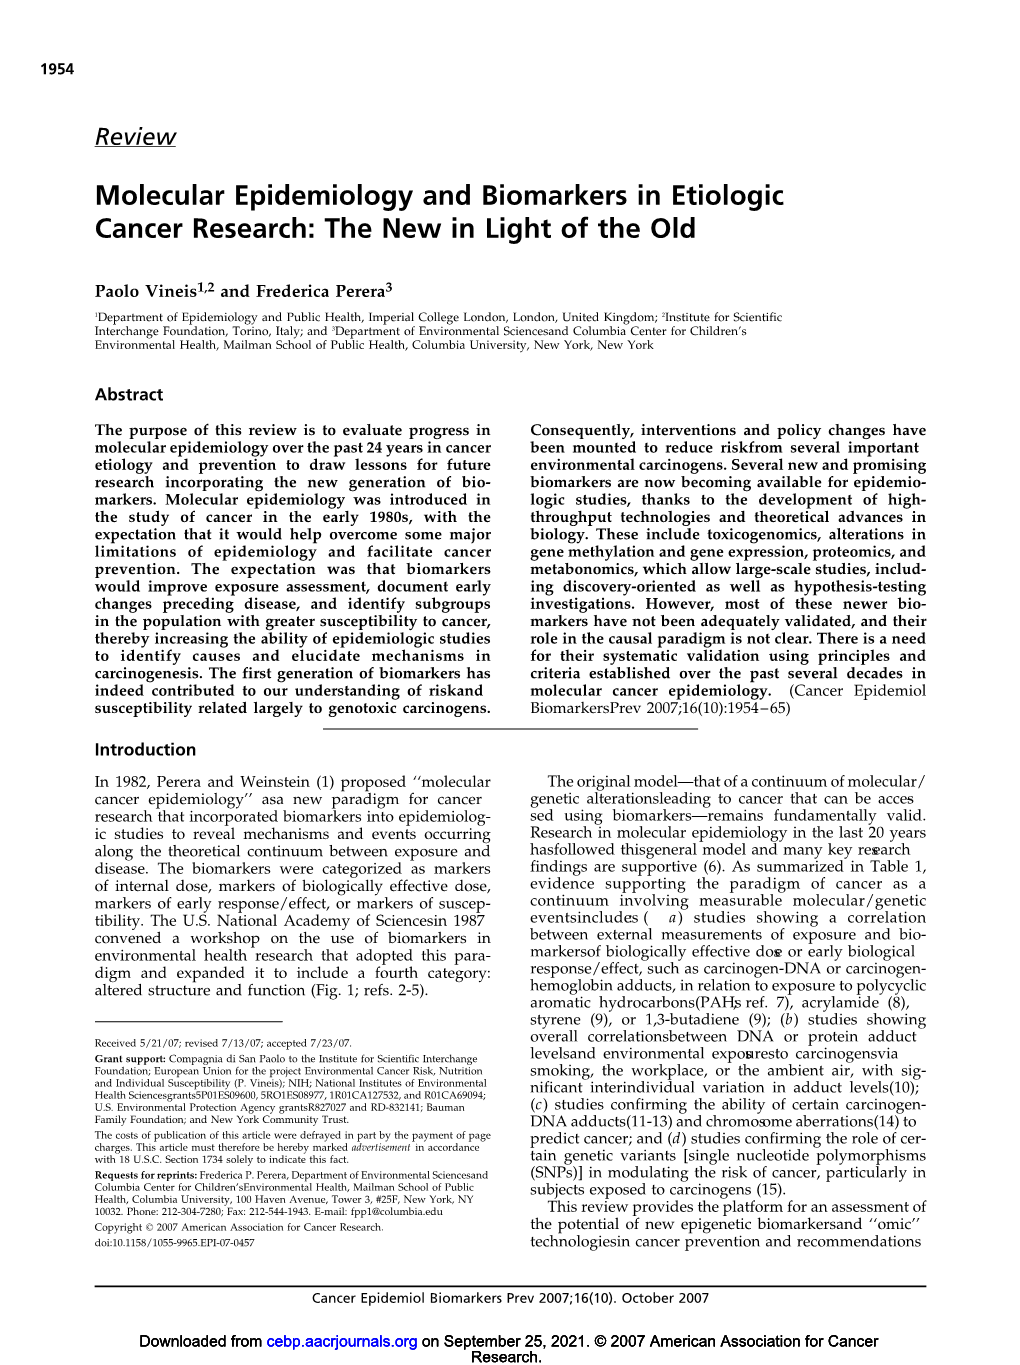 Molecular Epidemiology and Biomarkers in Etiologic Cancer Research: the New in Light of the Old